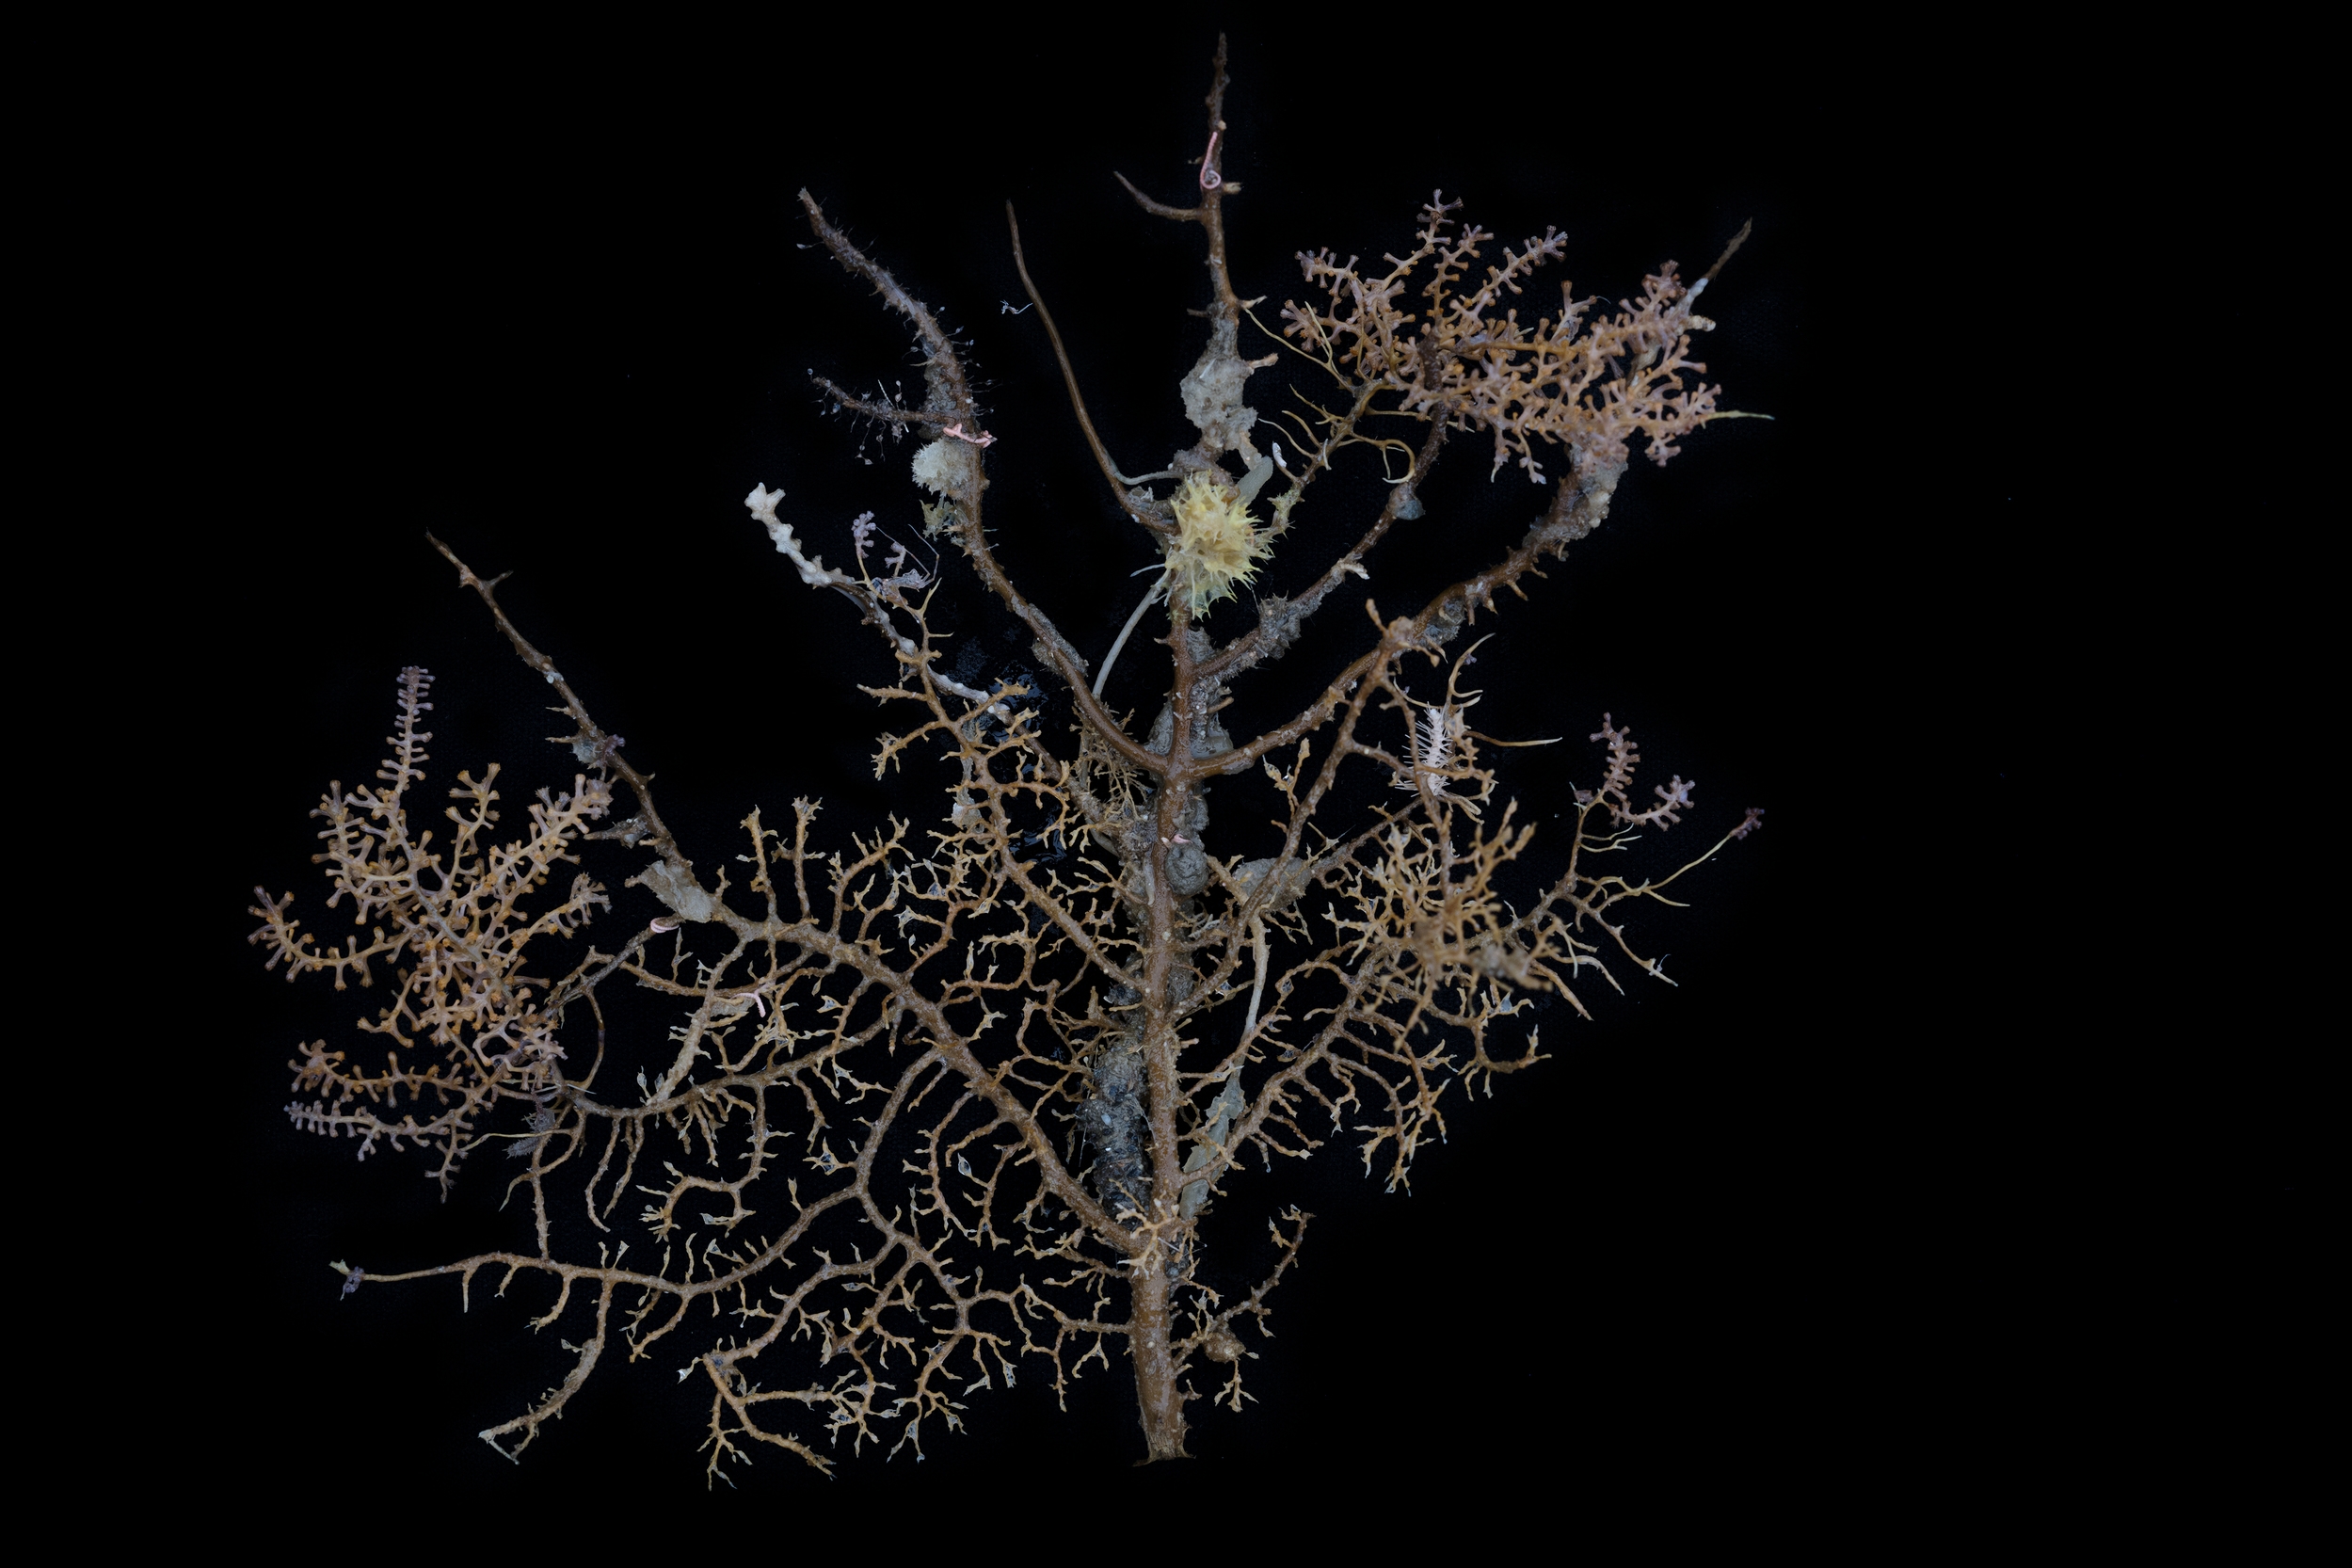 Gorgonian Coral Skeleton in the Antarctic:
 An Acanthogorgia gorgonian coral skeleton provides substrate and habitat for many other species including a white Clavularia stoloned octocoral, antarcturid isopods (crustaceans), demosponges hexactinellid glass sponges and tube-dwelling polychaete worms. © Christian Åslund / Greenpeace
